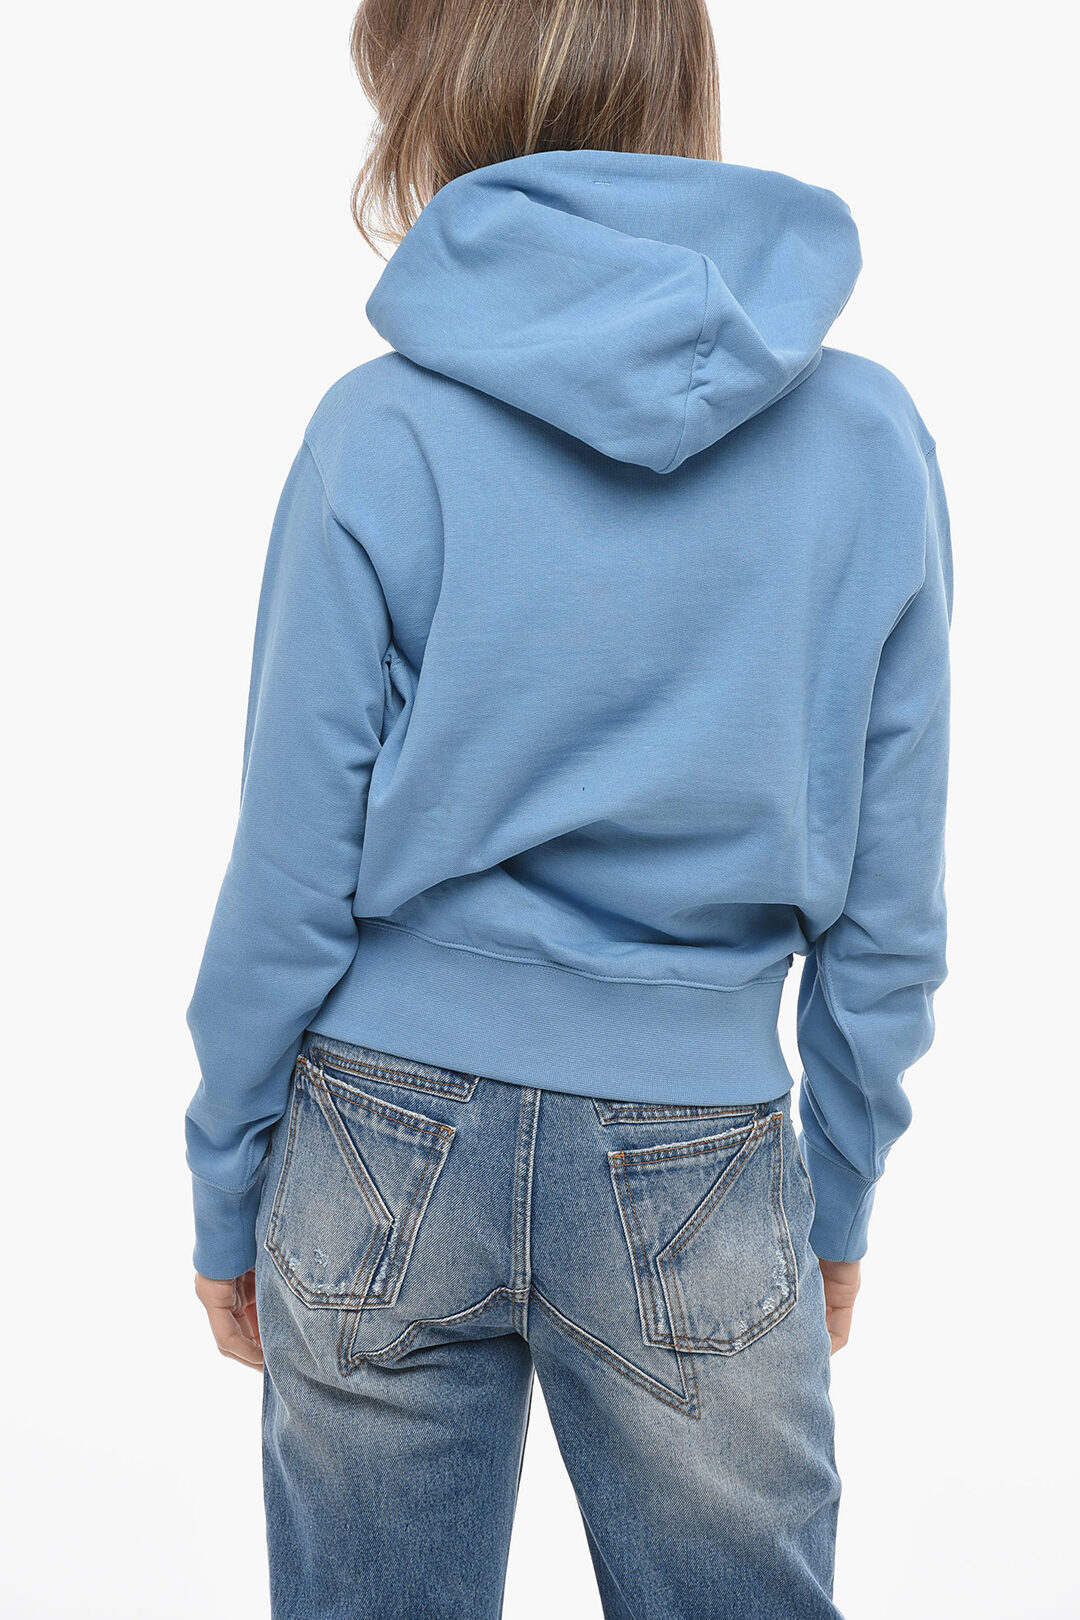 Kenzo Brushed Cotton Hoodie with Embroidered Logo women - Glamood 